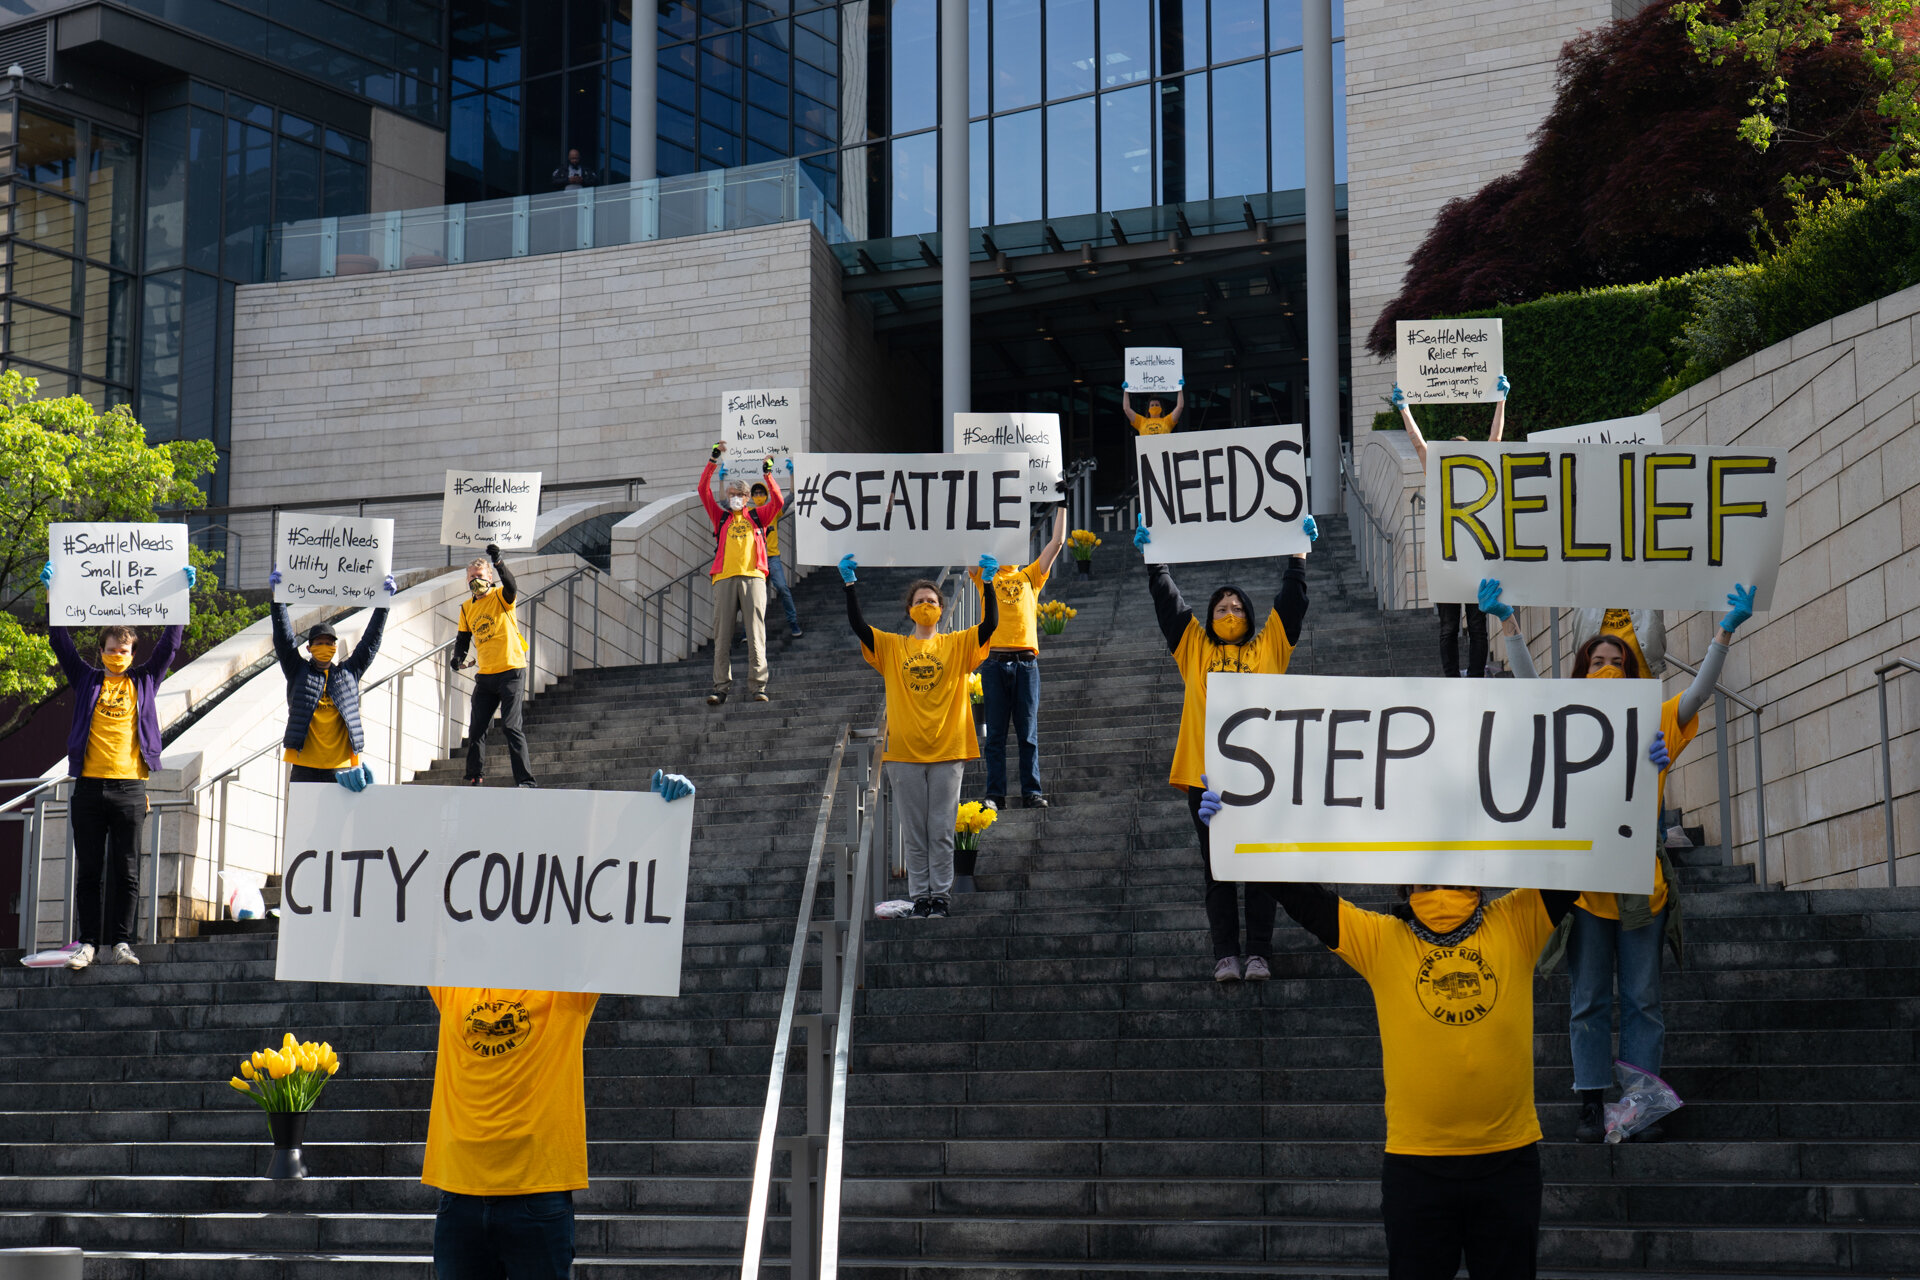  The first Seattle protest since the  quarantine was held outside of city hall calling for the widespread economic relief for Seattle residents. April 29, 2020 